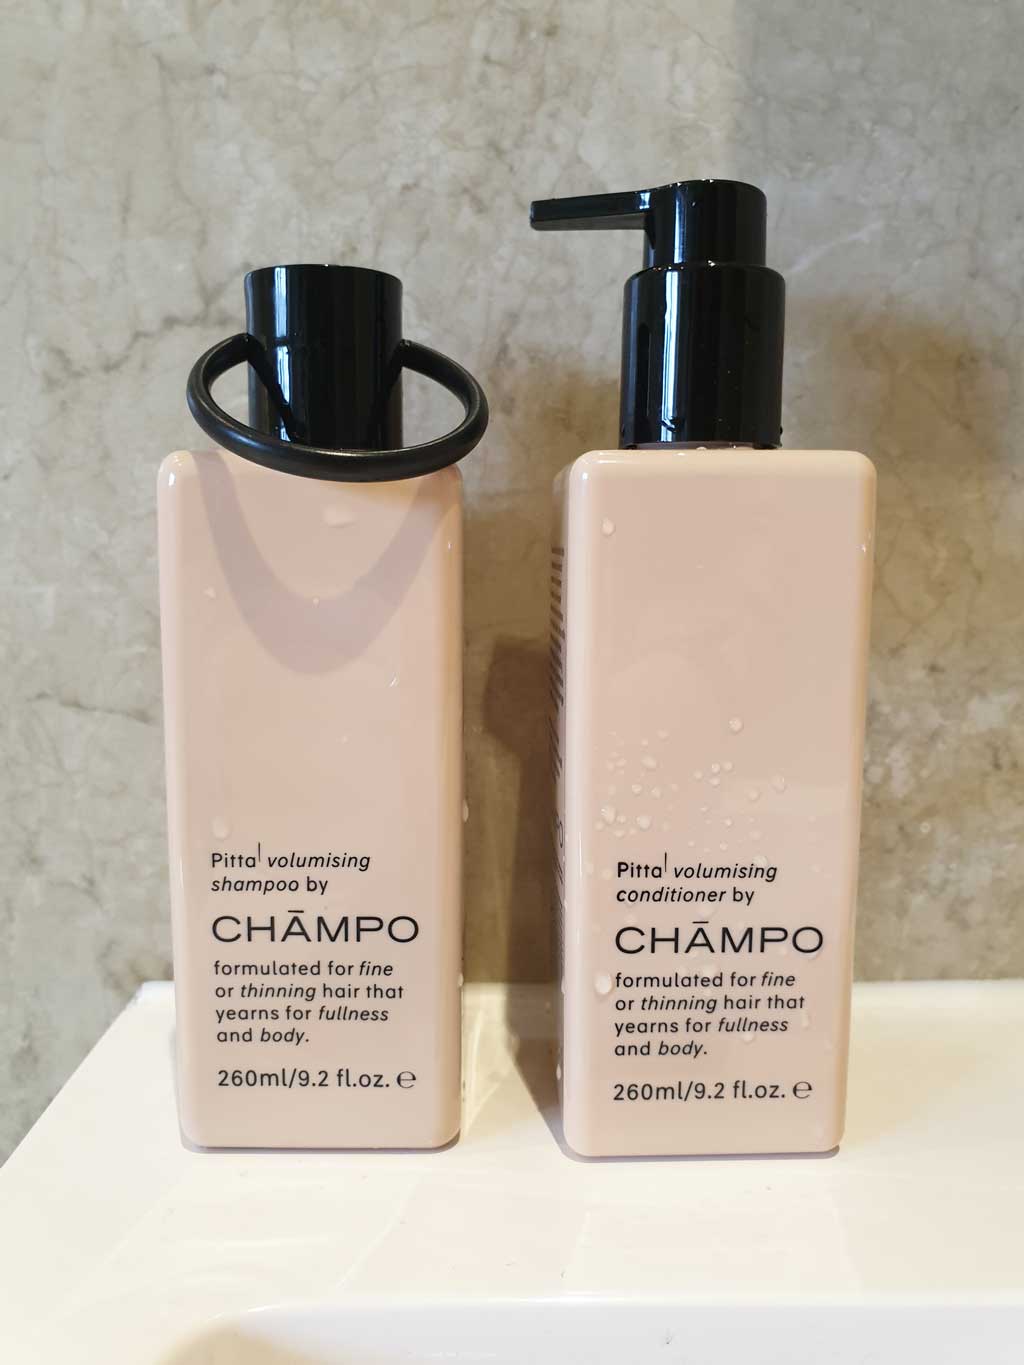 Chāmpo Vegan and Cruelty Free Hair Care - My honest review